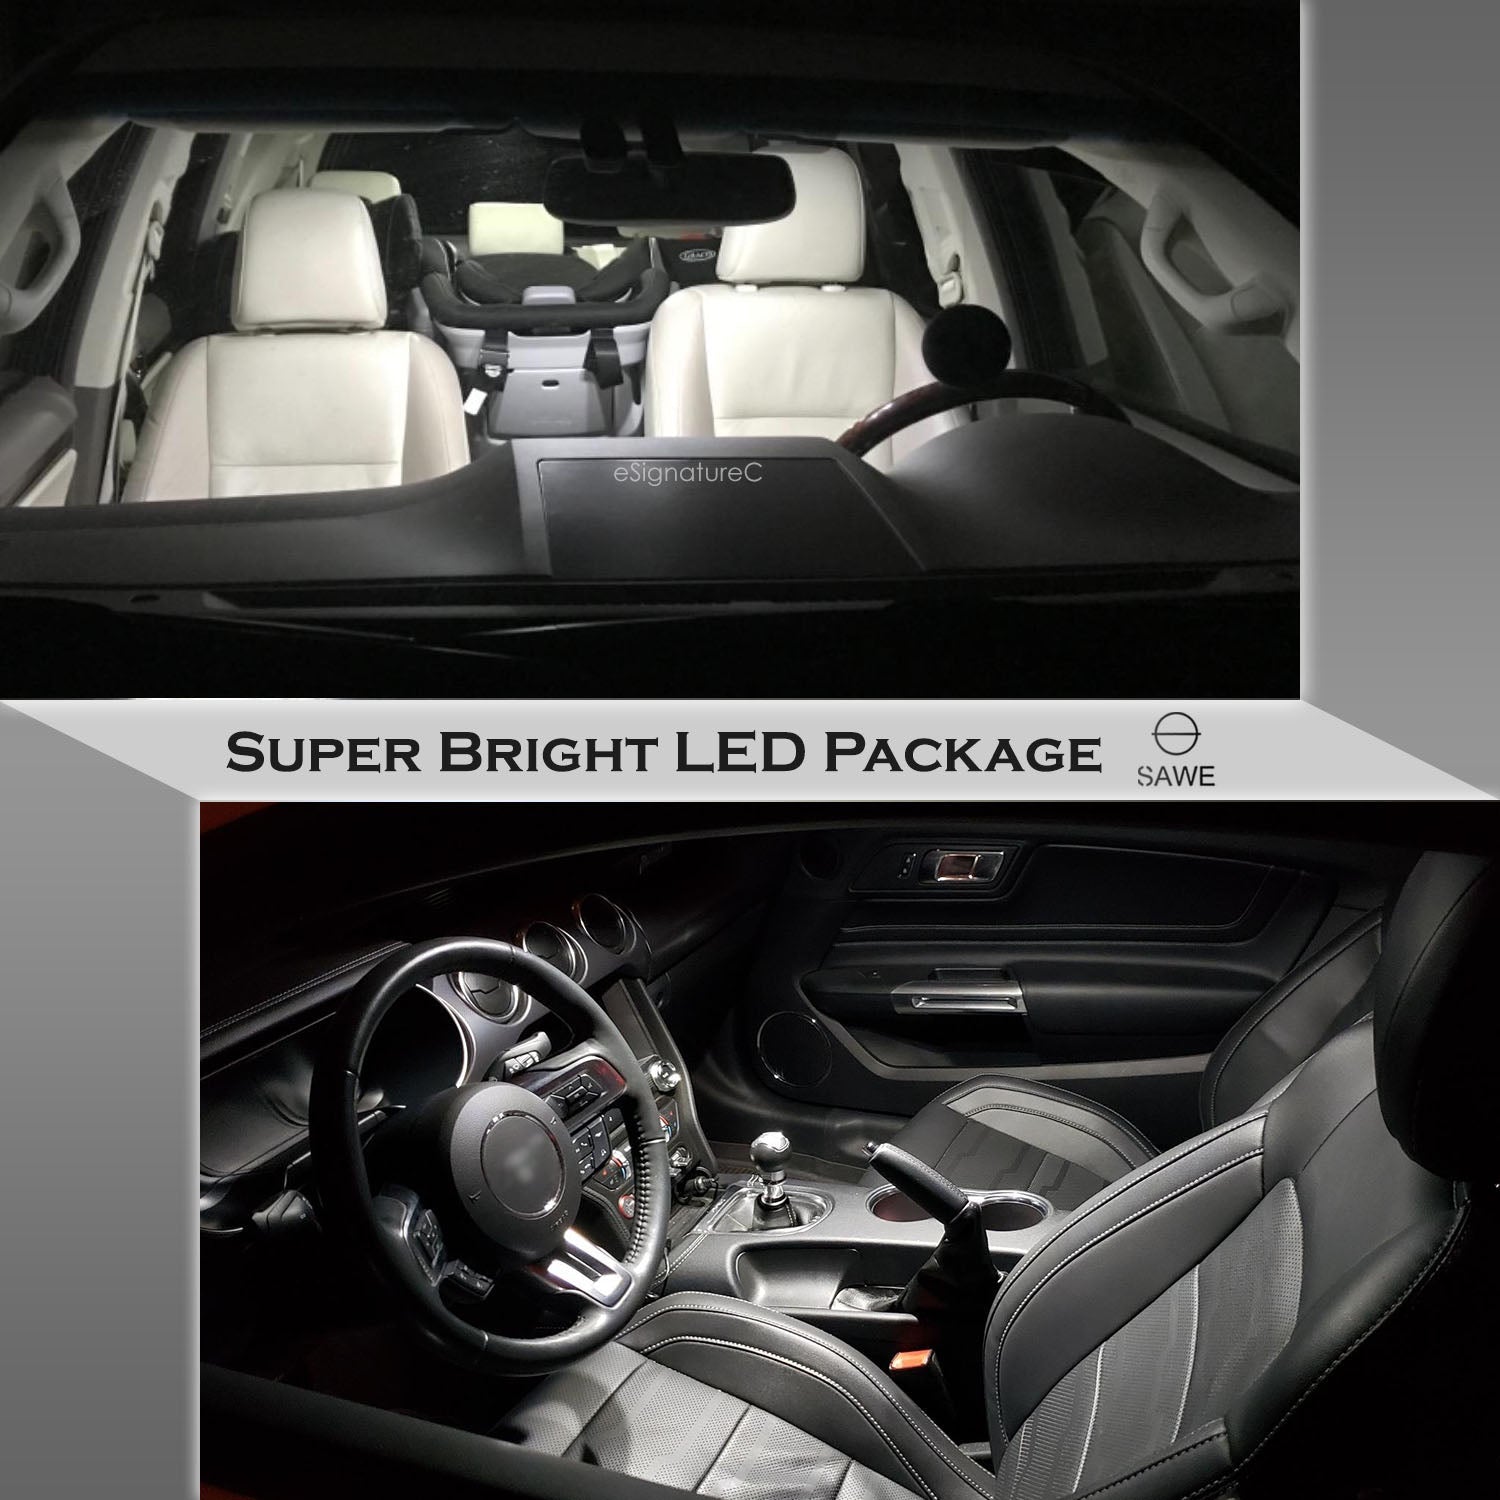 For Nissan Altima Interior LED Lights - Dome & Map Light Bulbs Package Kit for 2016 - 2019 - White